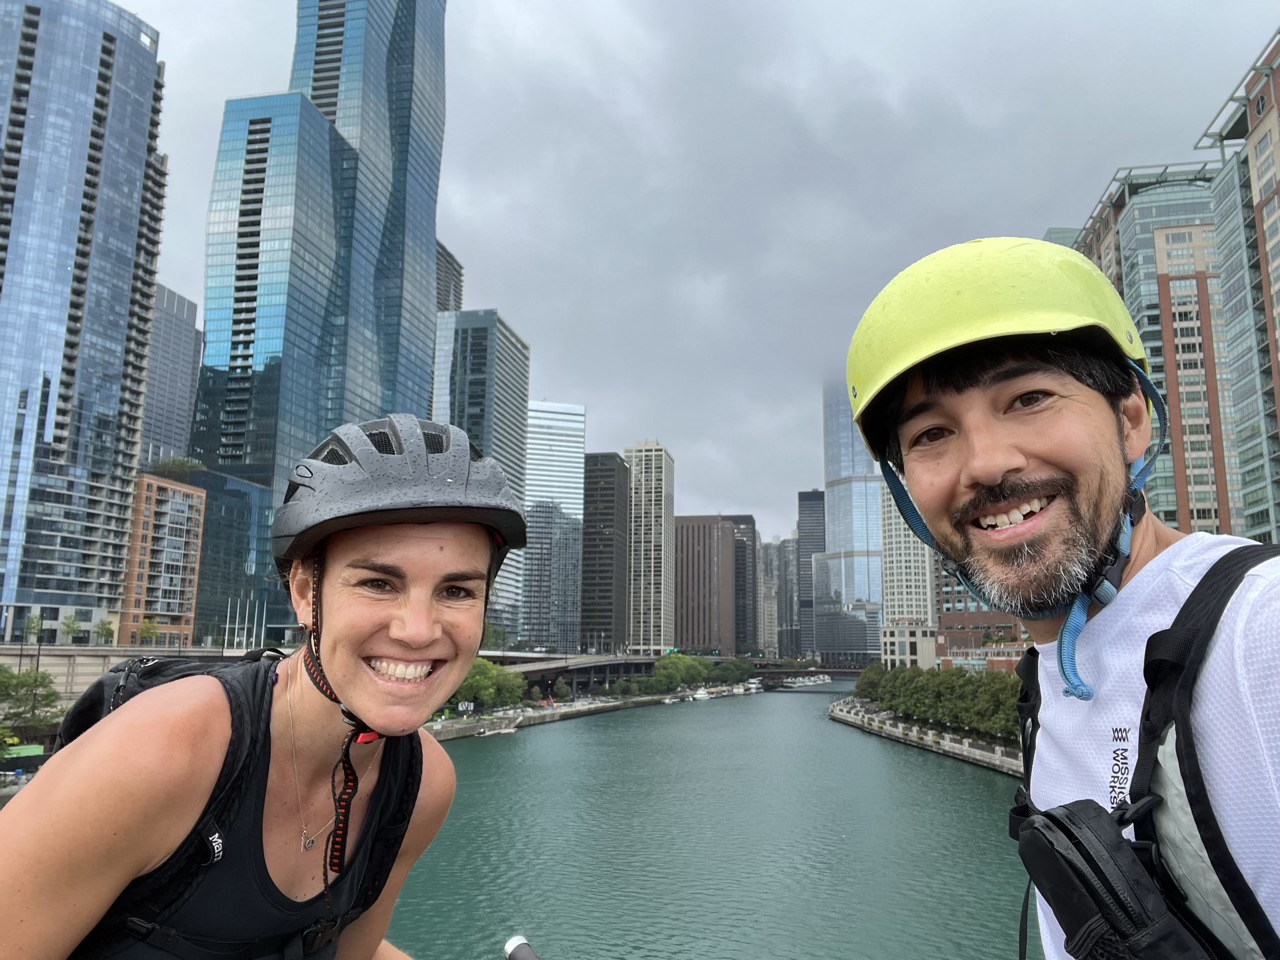 Cara and Benjamin on bikes with the Chicago skyline and river behind them